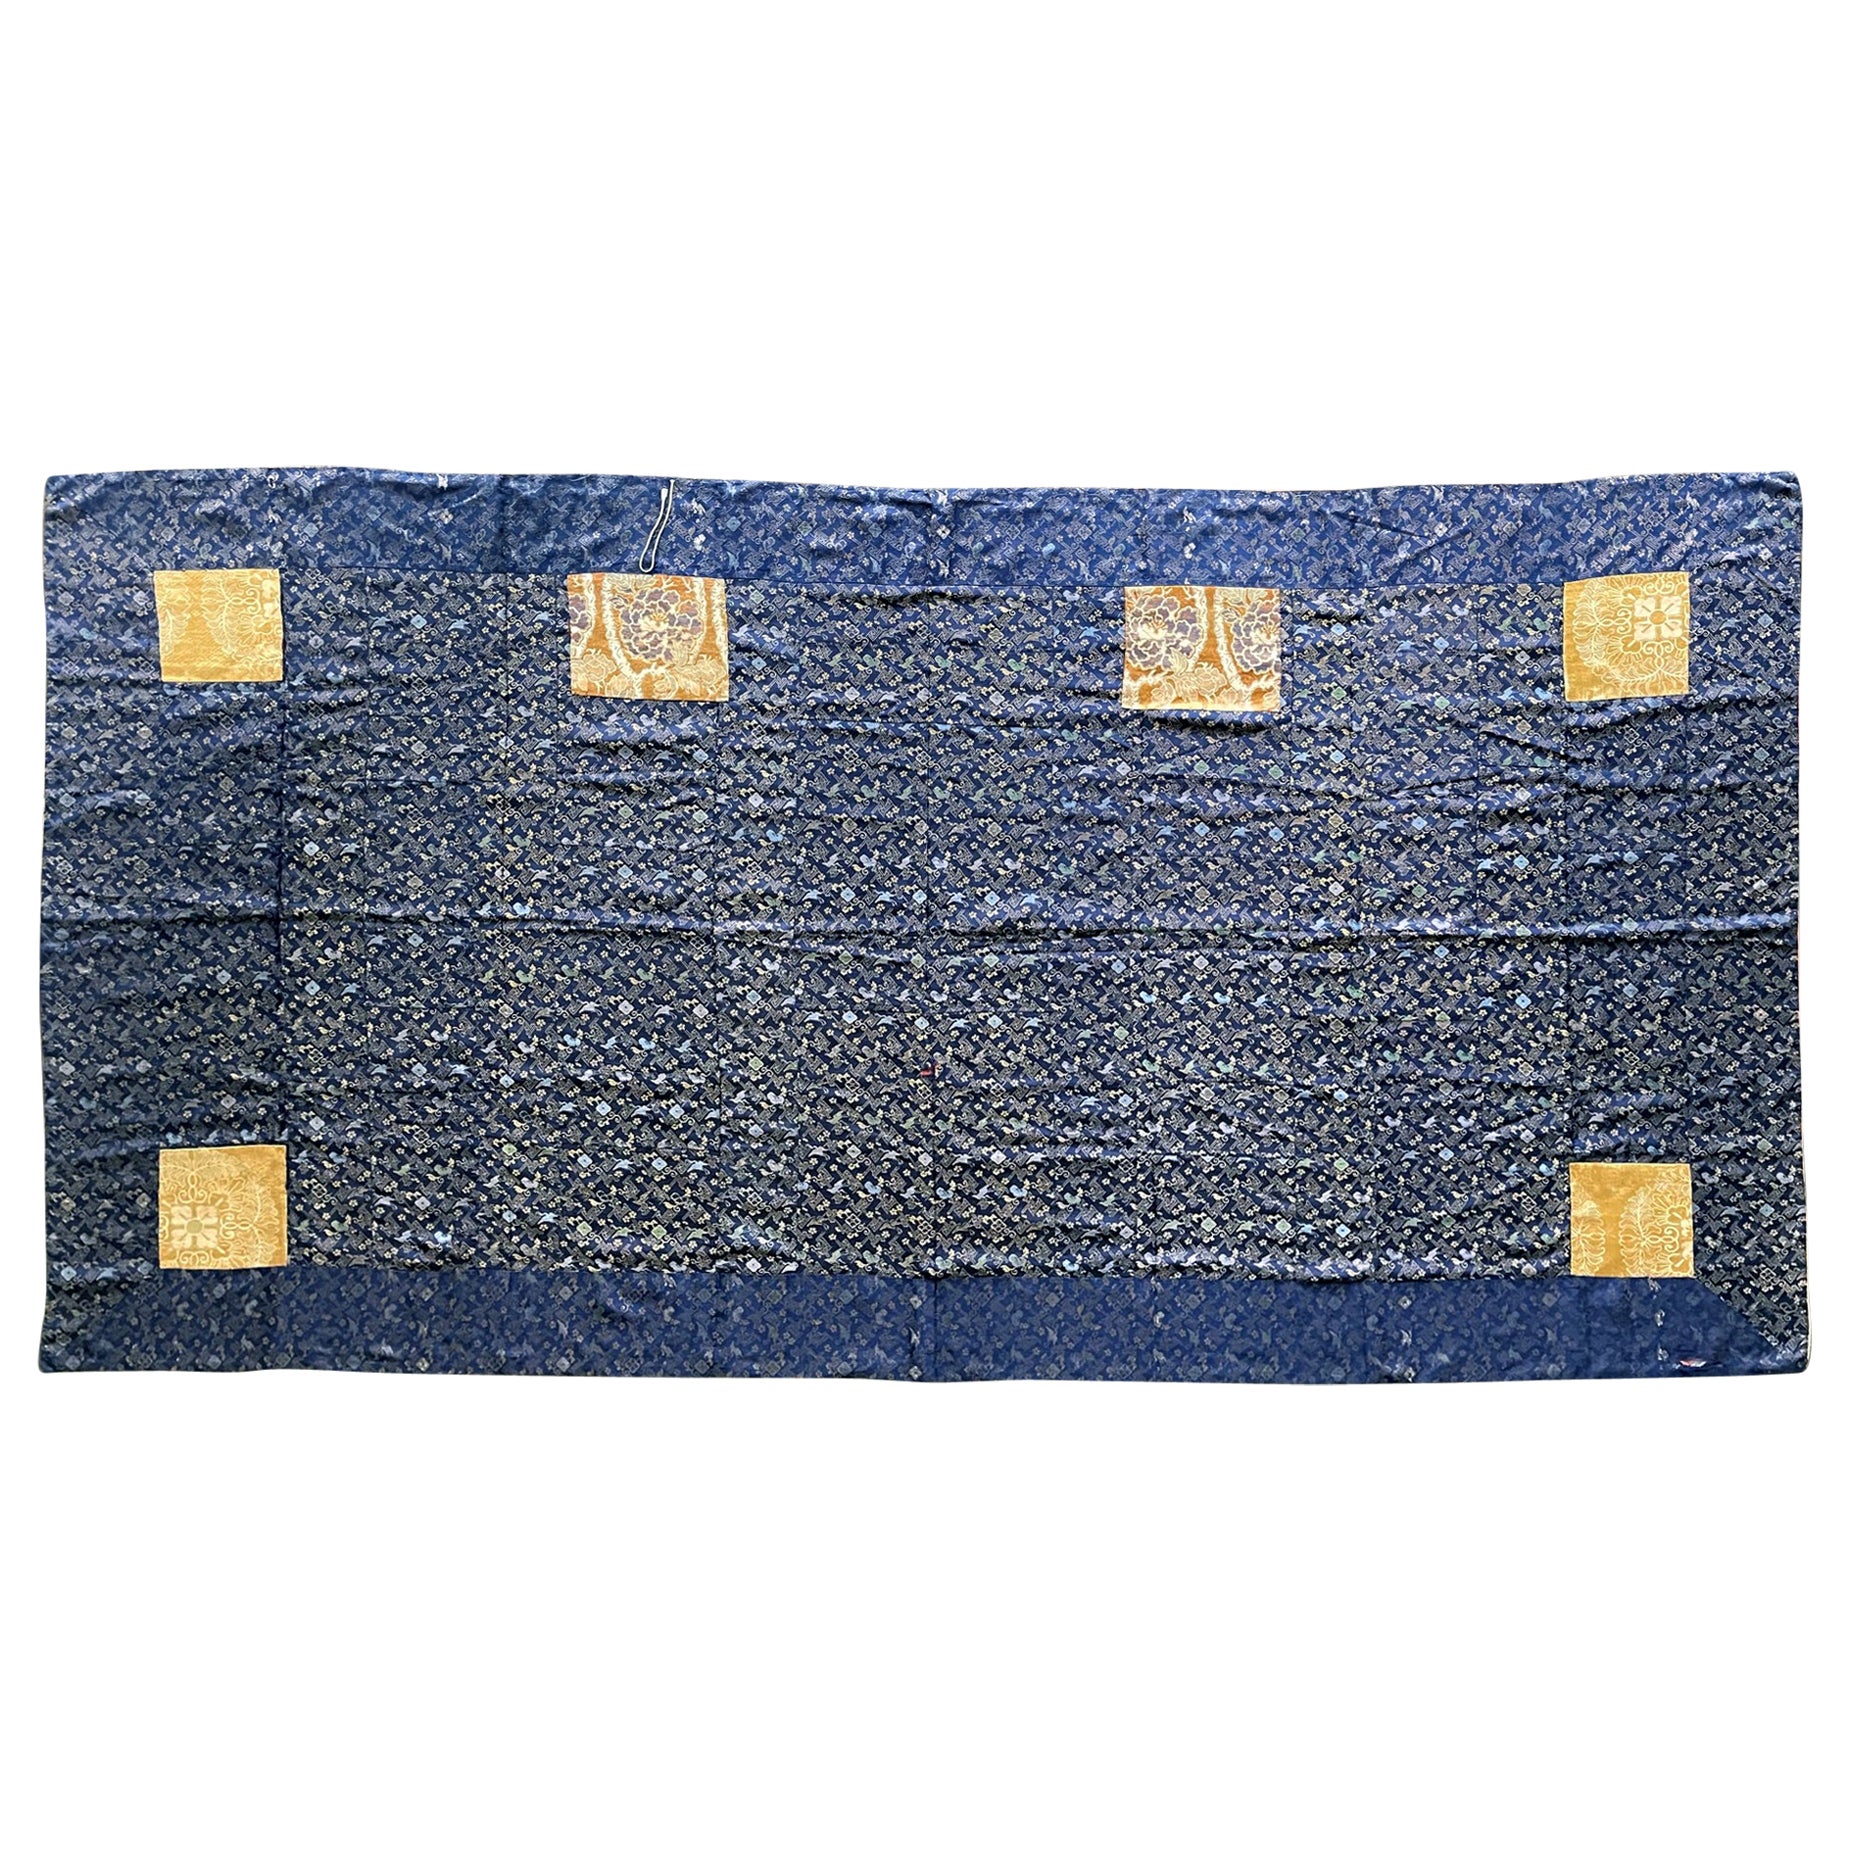 Japanese Monastery Robe Patchwork Kesa with Scription Edo Period For Sale